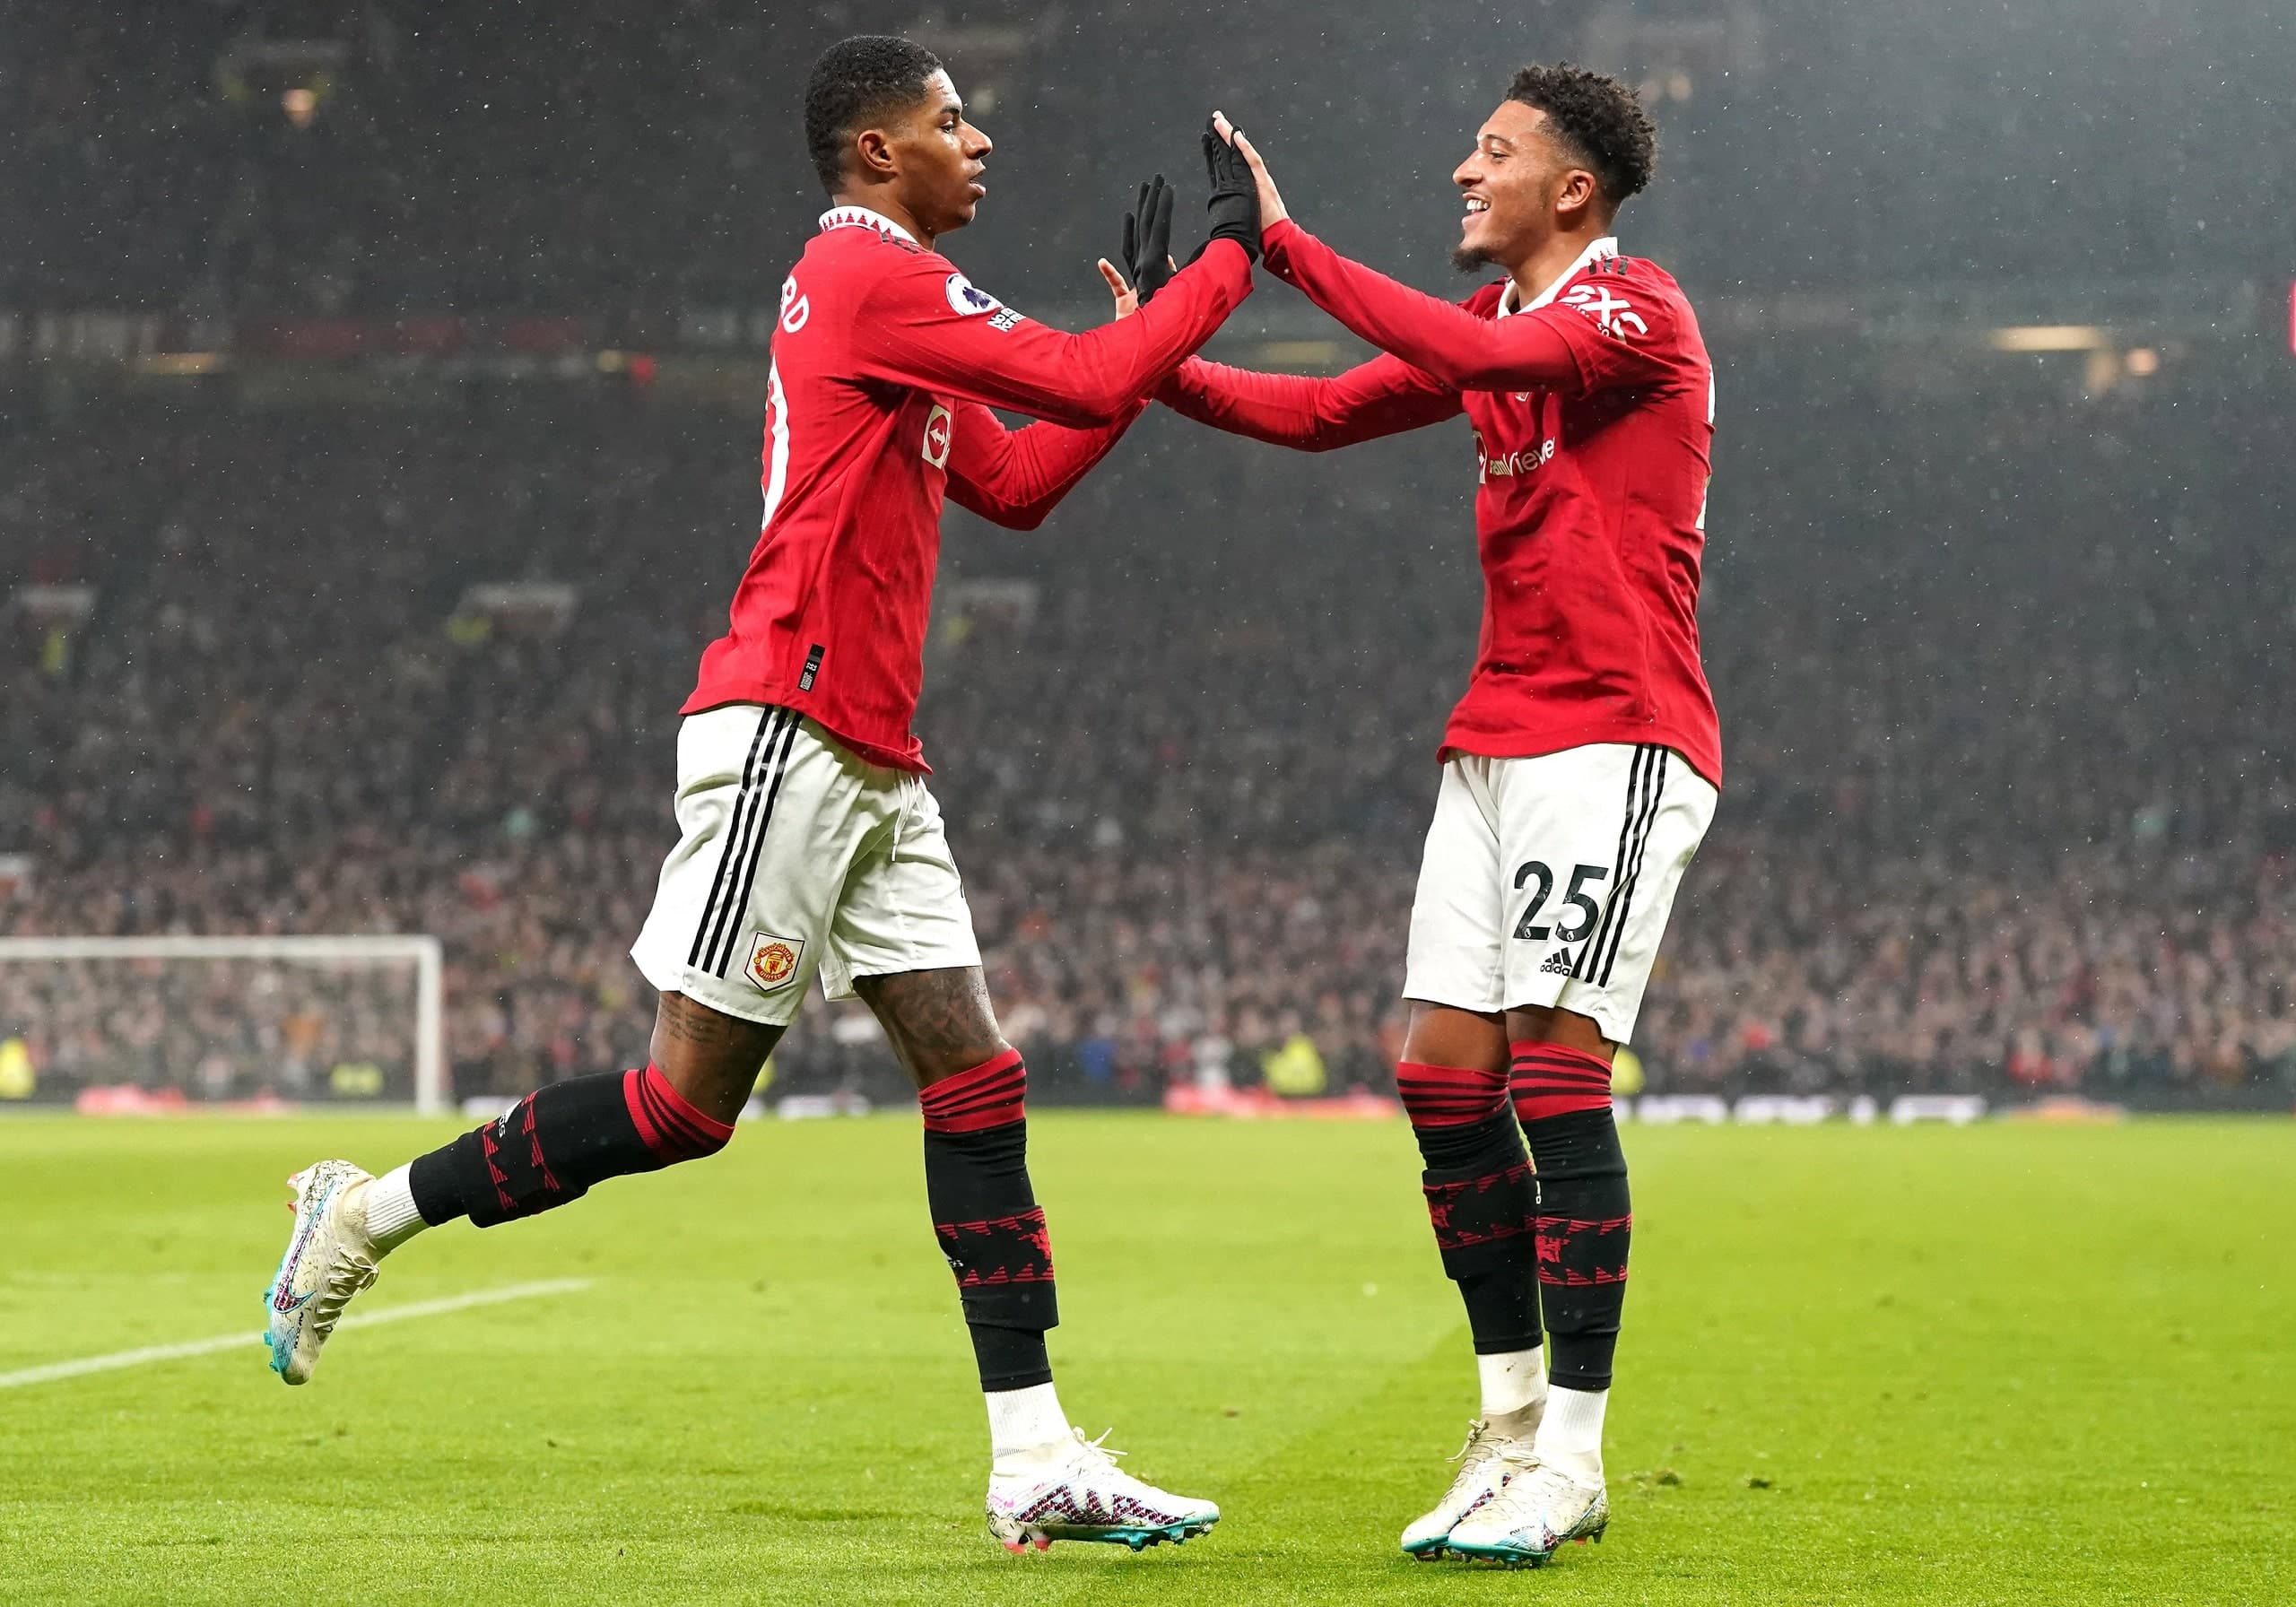 Manchester United, ManU v Brentford - Premier League - Old Trafford Manchester United s Marcus Rashford (left) celebrates scoring their side s first goal of the game with team-mate Jadon Sancho during the Premier League match at Old Trafford, Manchester. Picture date: Wednesday April 5, 2023. EDITORIAL USE ONLY No use with unauthorised audio, video, data, fixture lists, club/league logos or live services. Online in-match use limited to 120 images, no video emulation. No use in betting, games or single club/league/player publications. PUBLICATIONxNOTxINxUKxIRL Copyright: xNickxPottsx 71647020